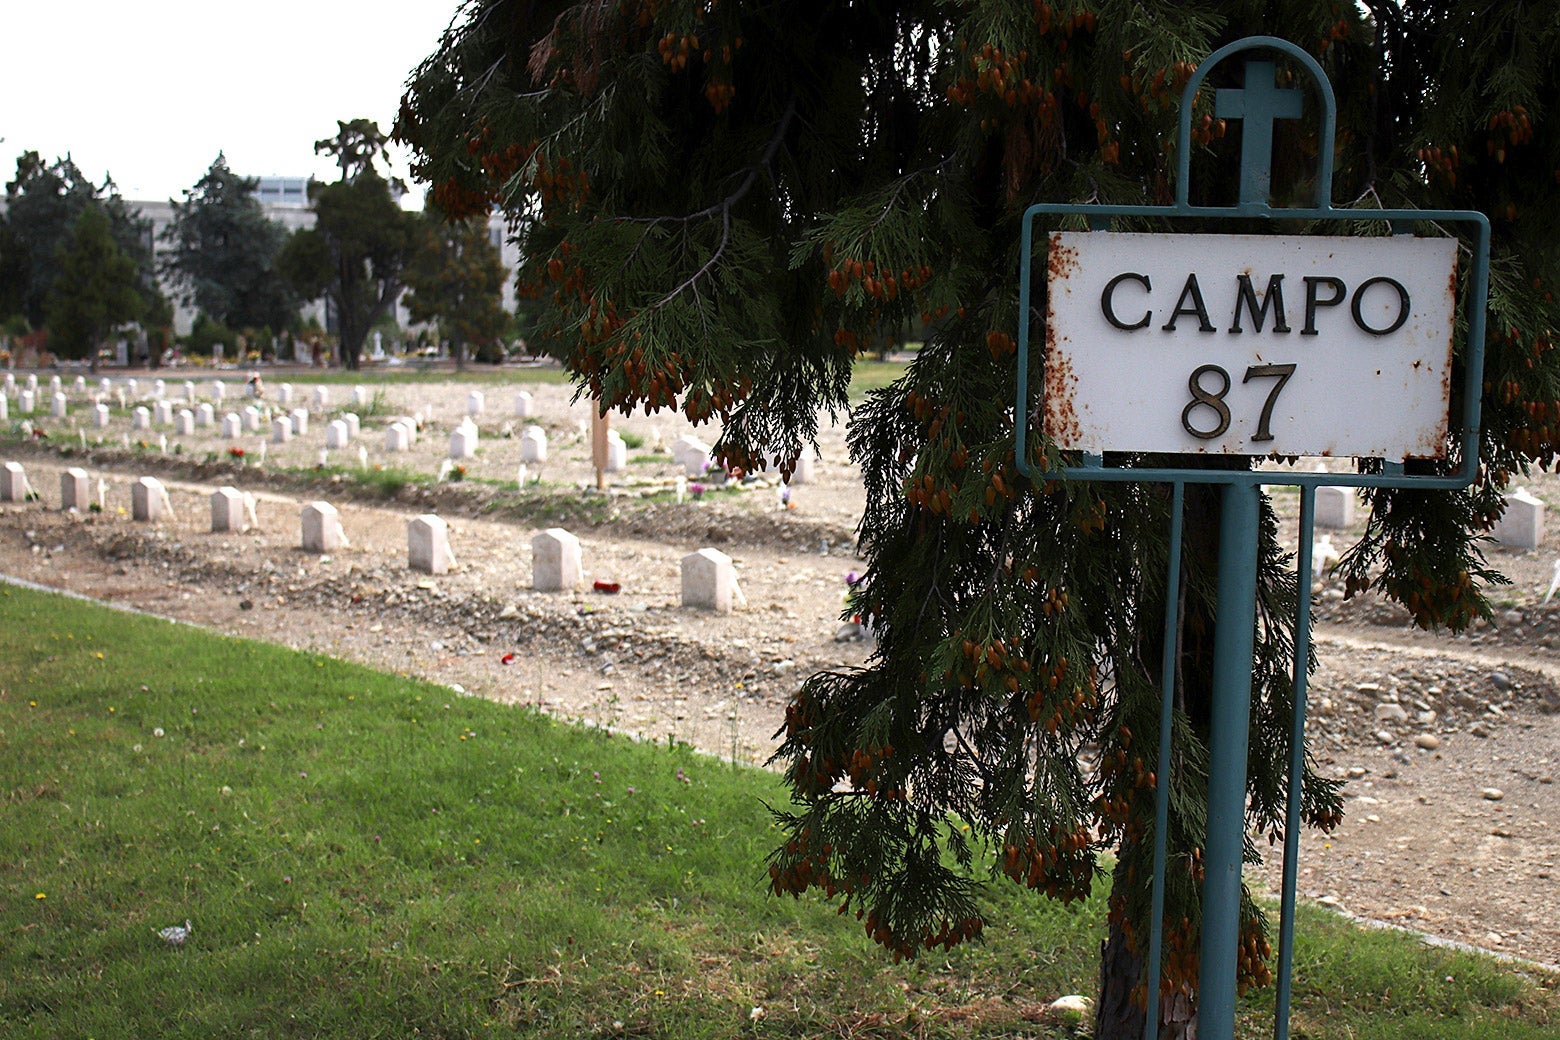 A sign near the graveyard marking Campo 87.